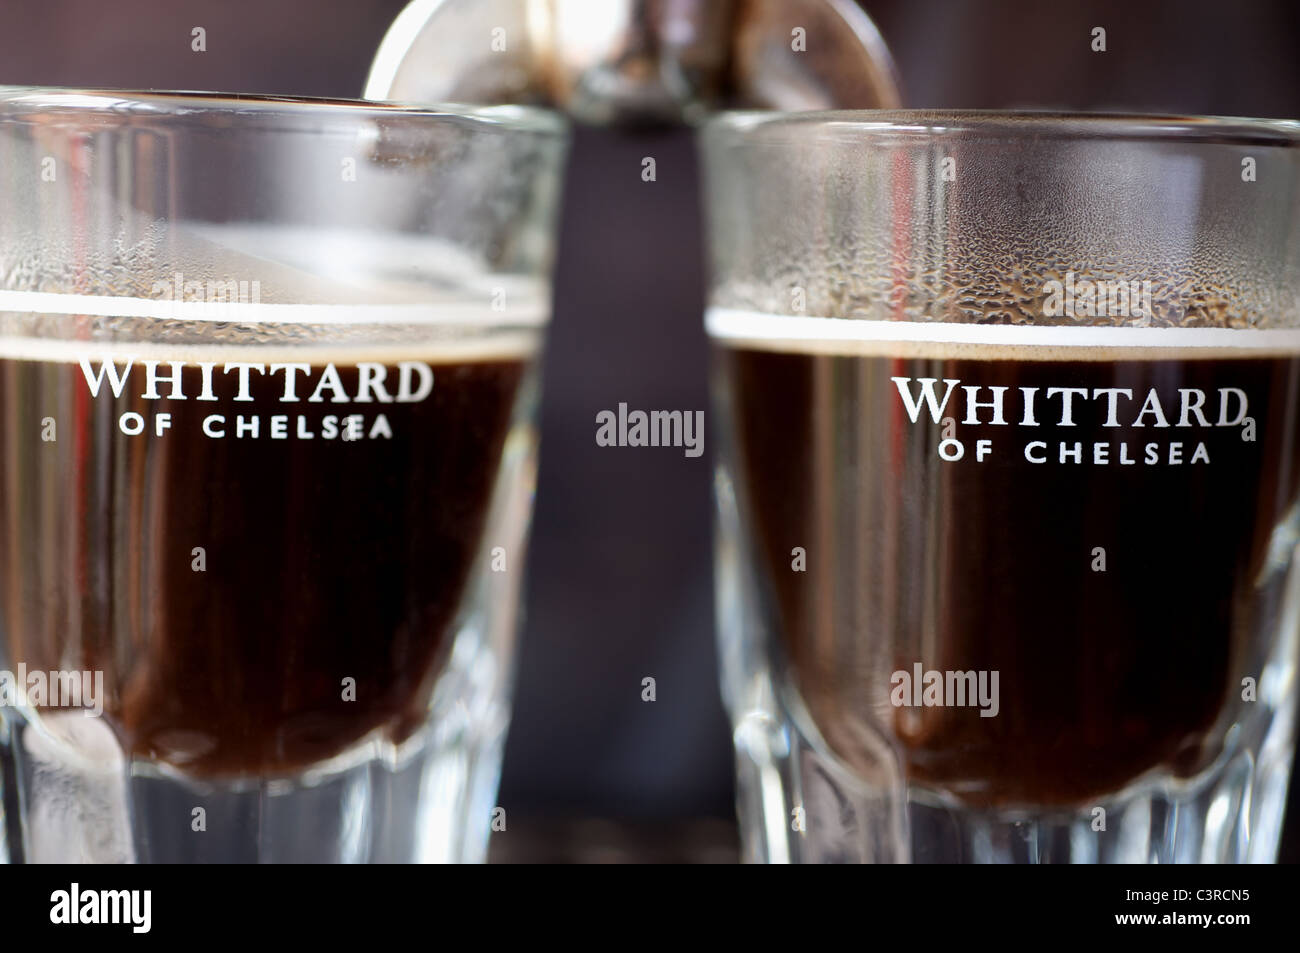 Whittard of Chelsea expresso coffee Stock Photo